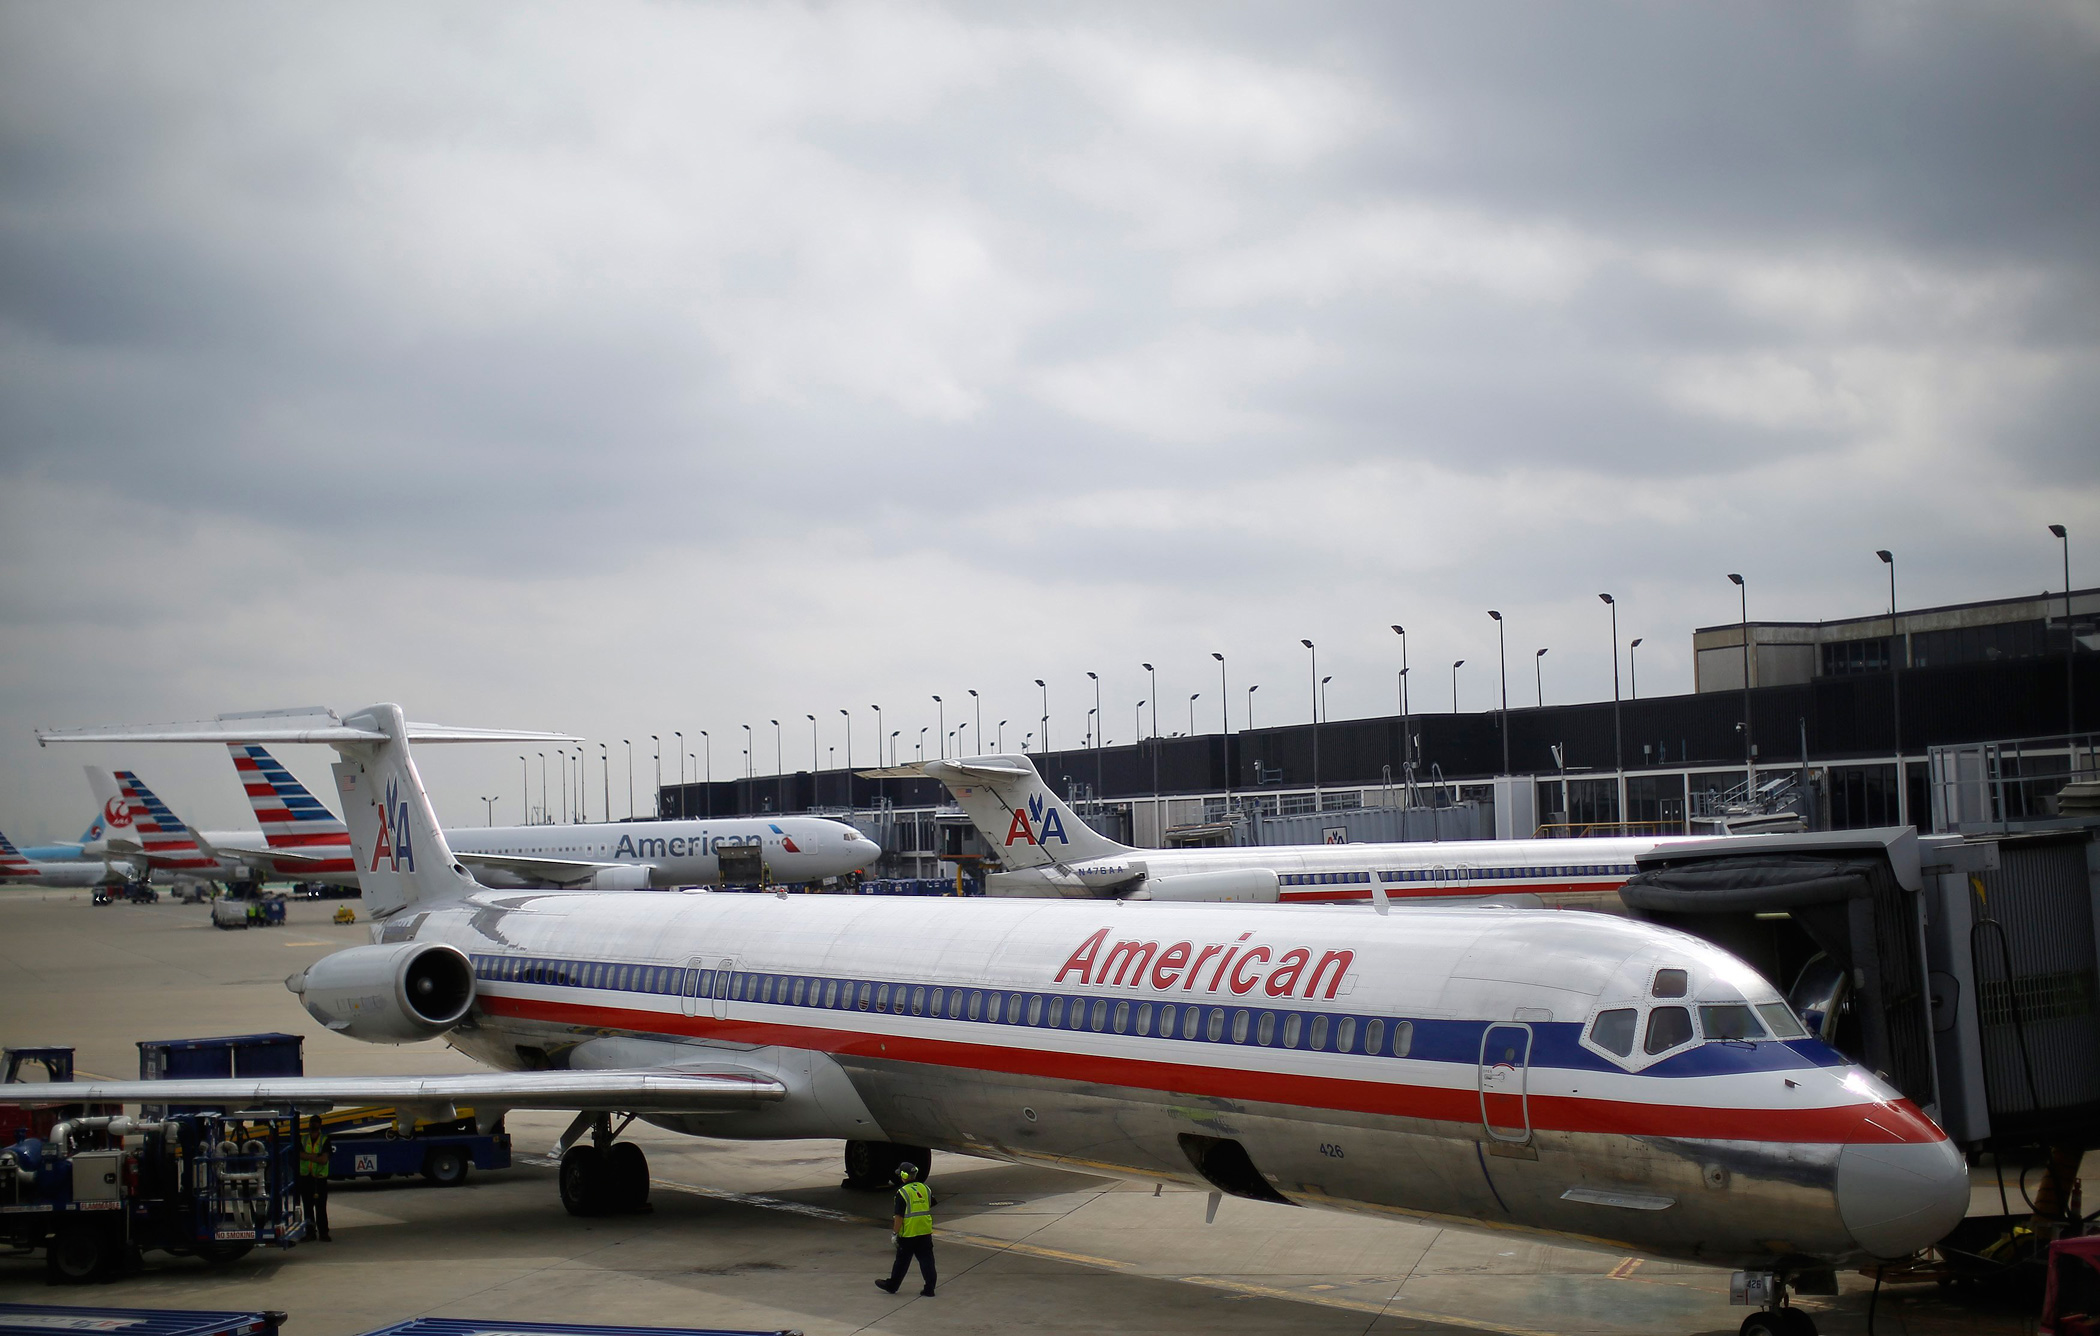 An American Airlines airplane sits at a gate at the O'Hare Airport in Chicago, Illinois